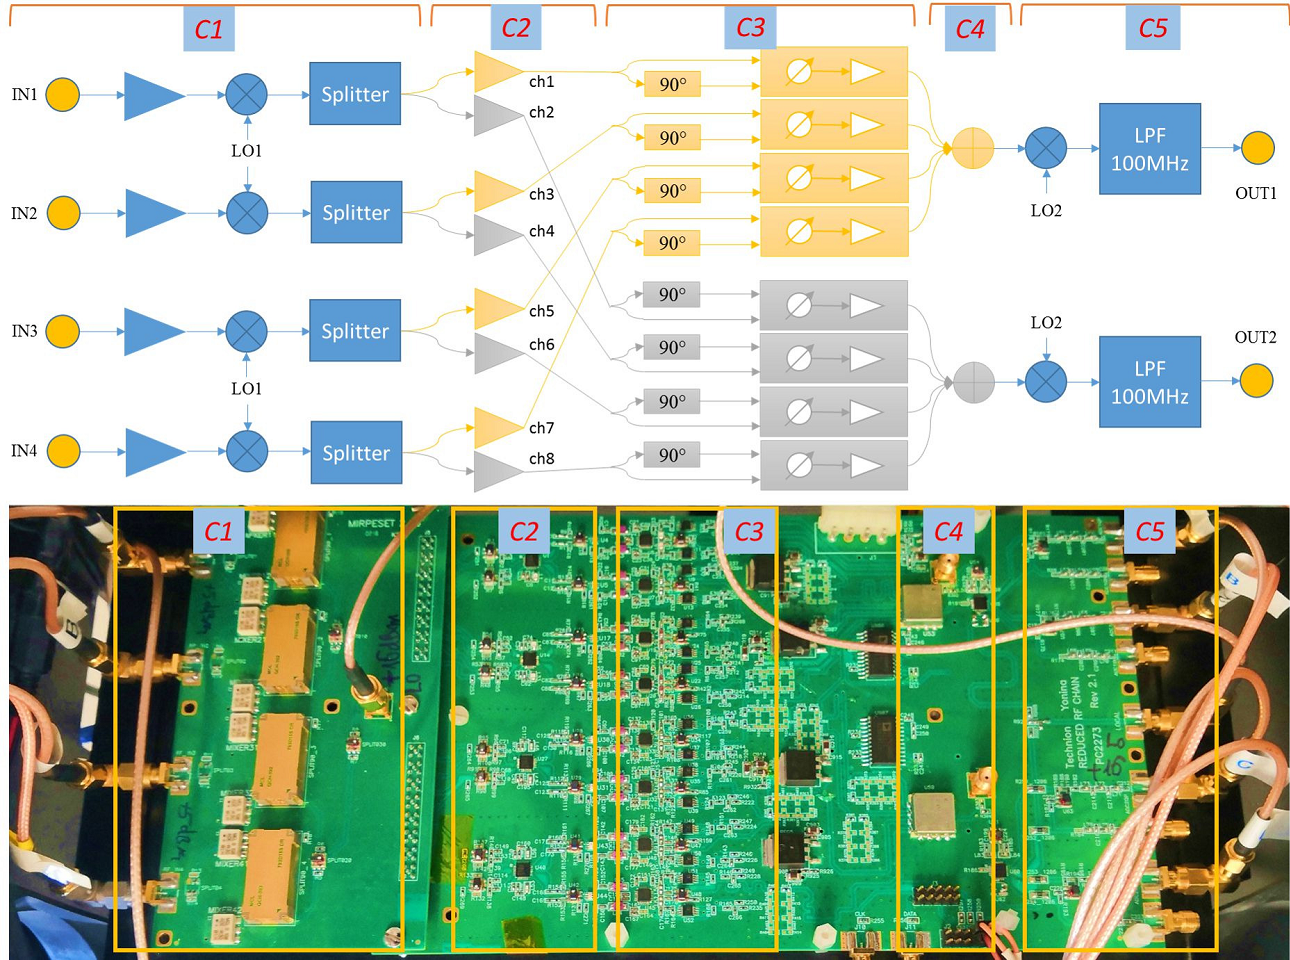 Fig. 5 Overview of the analog combiner board. Top: block diagram. Bottom: circuit board.